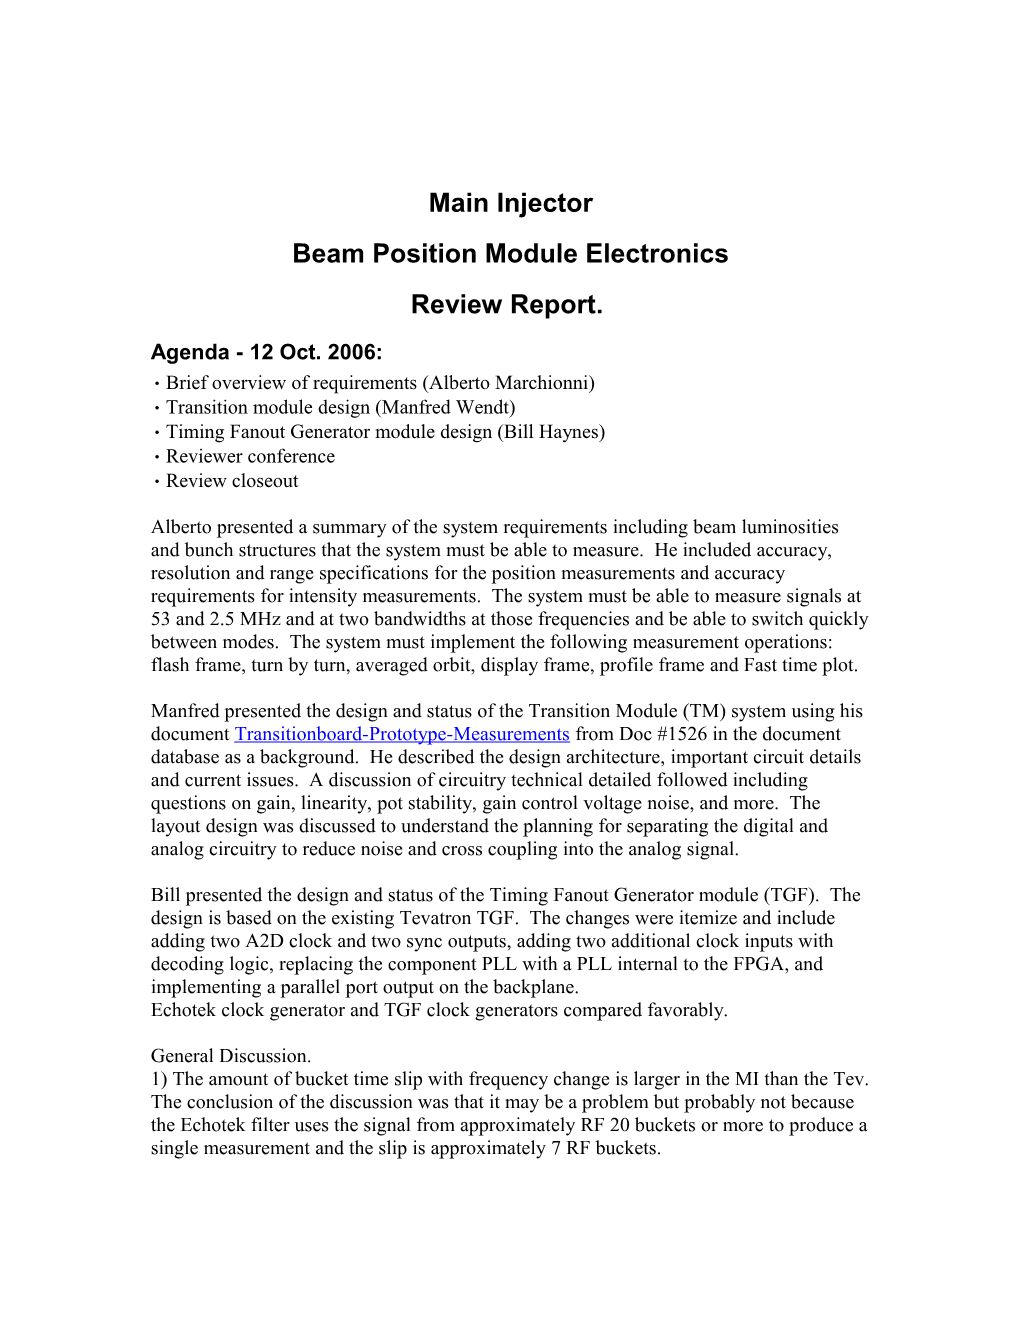 You Are Invited to Review the Main Injector (MI) Beam Position Monitor (BPM) Electronic Design